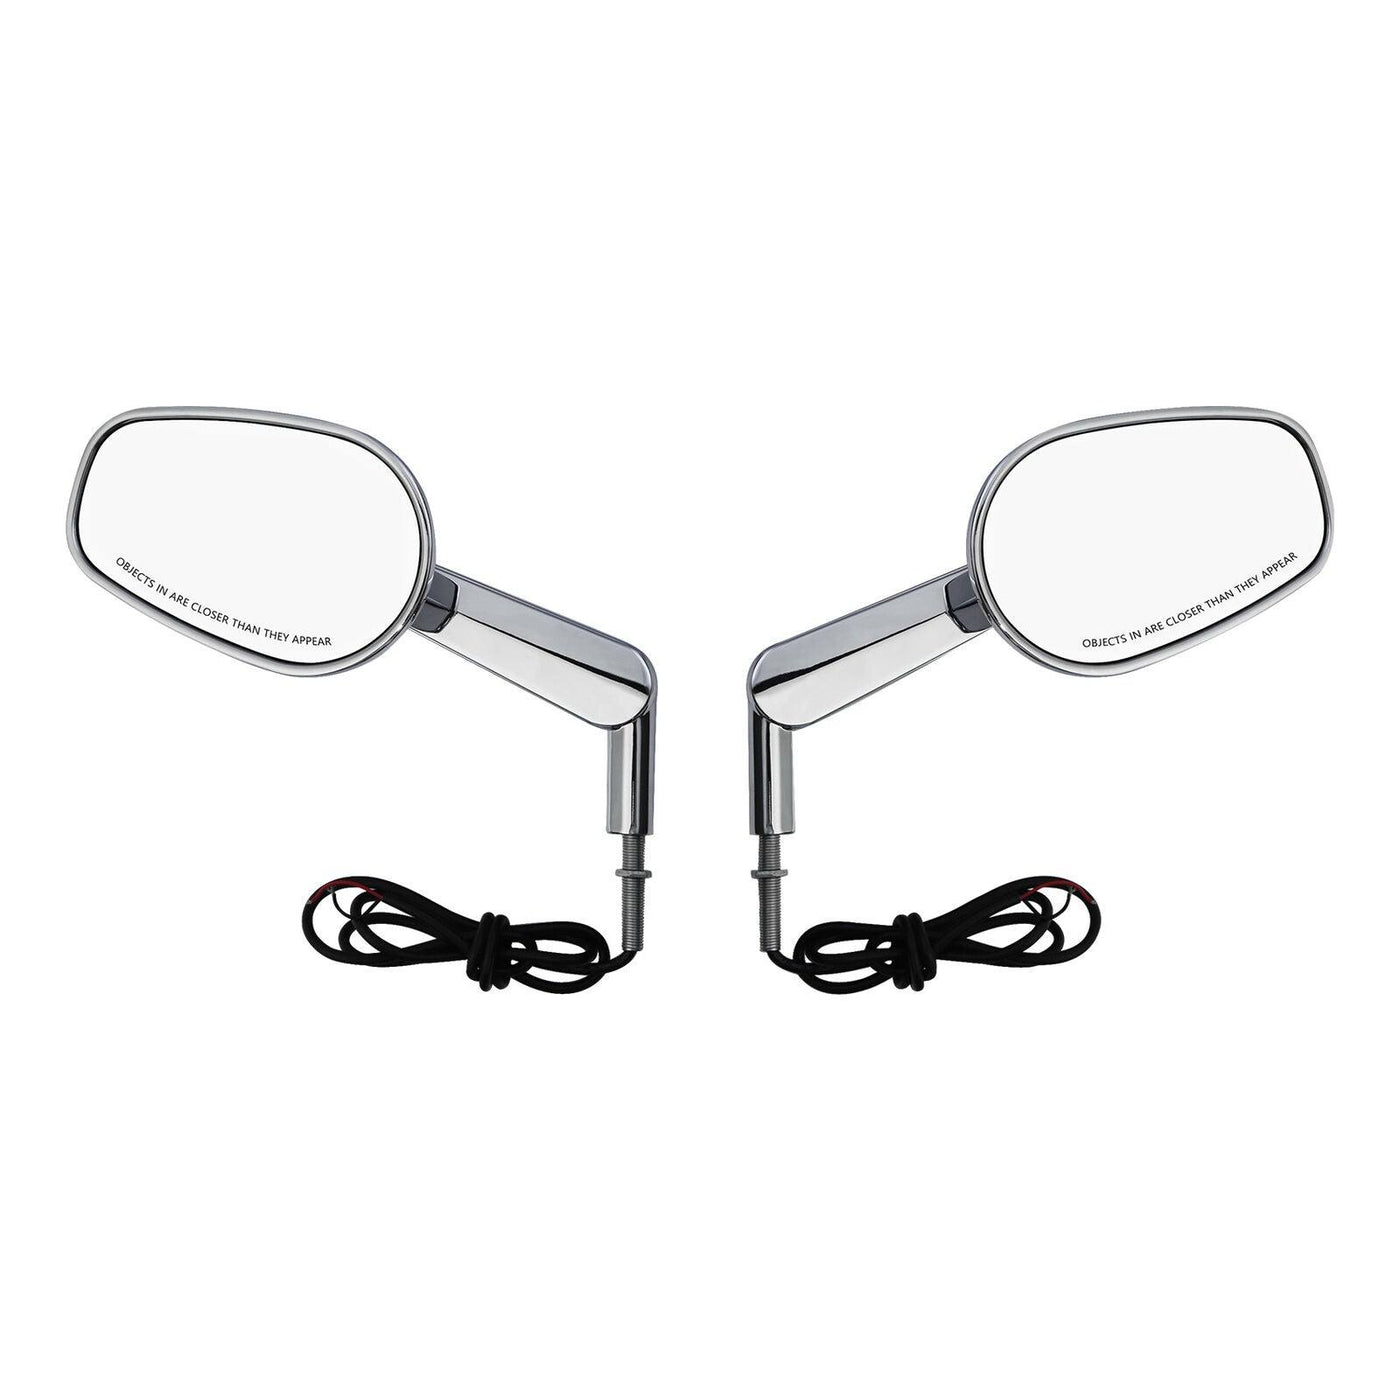 TCMT Rear View Mirrors Muscle LED Turn Signals Light For Harley V-ROD VROD VRSCF - Moto Life Products